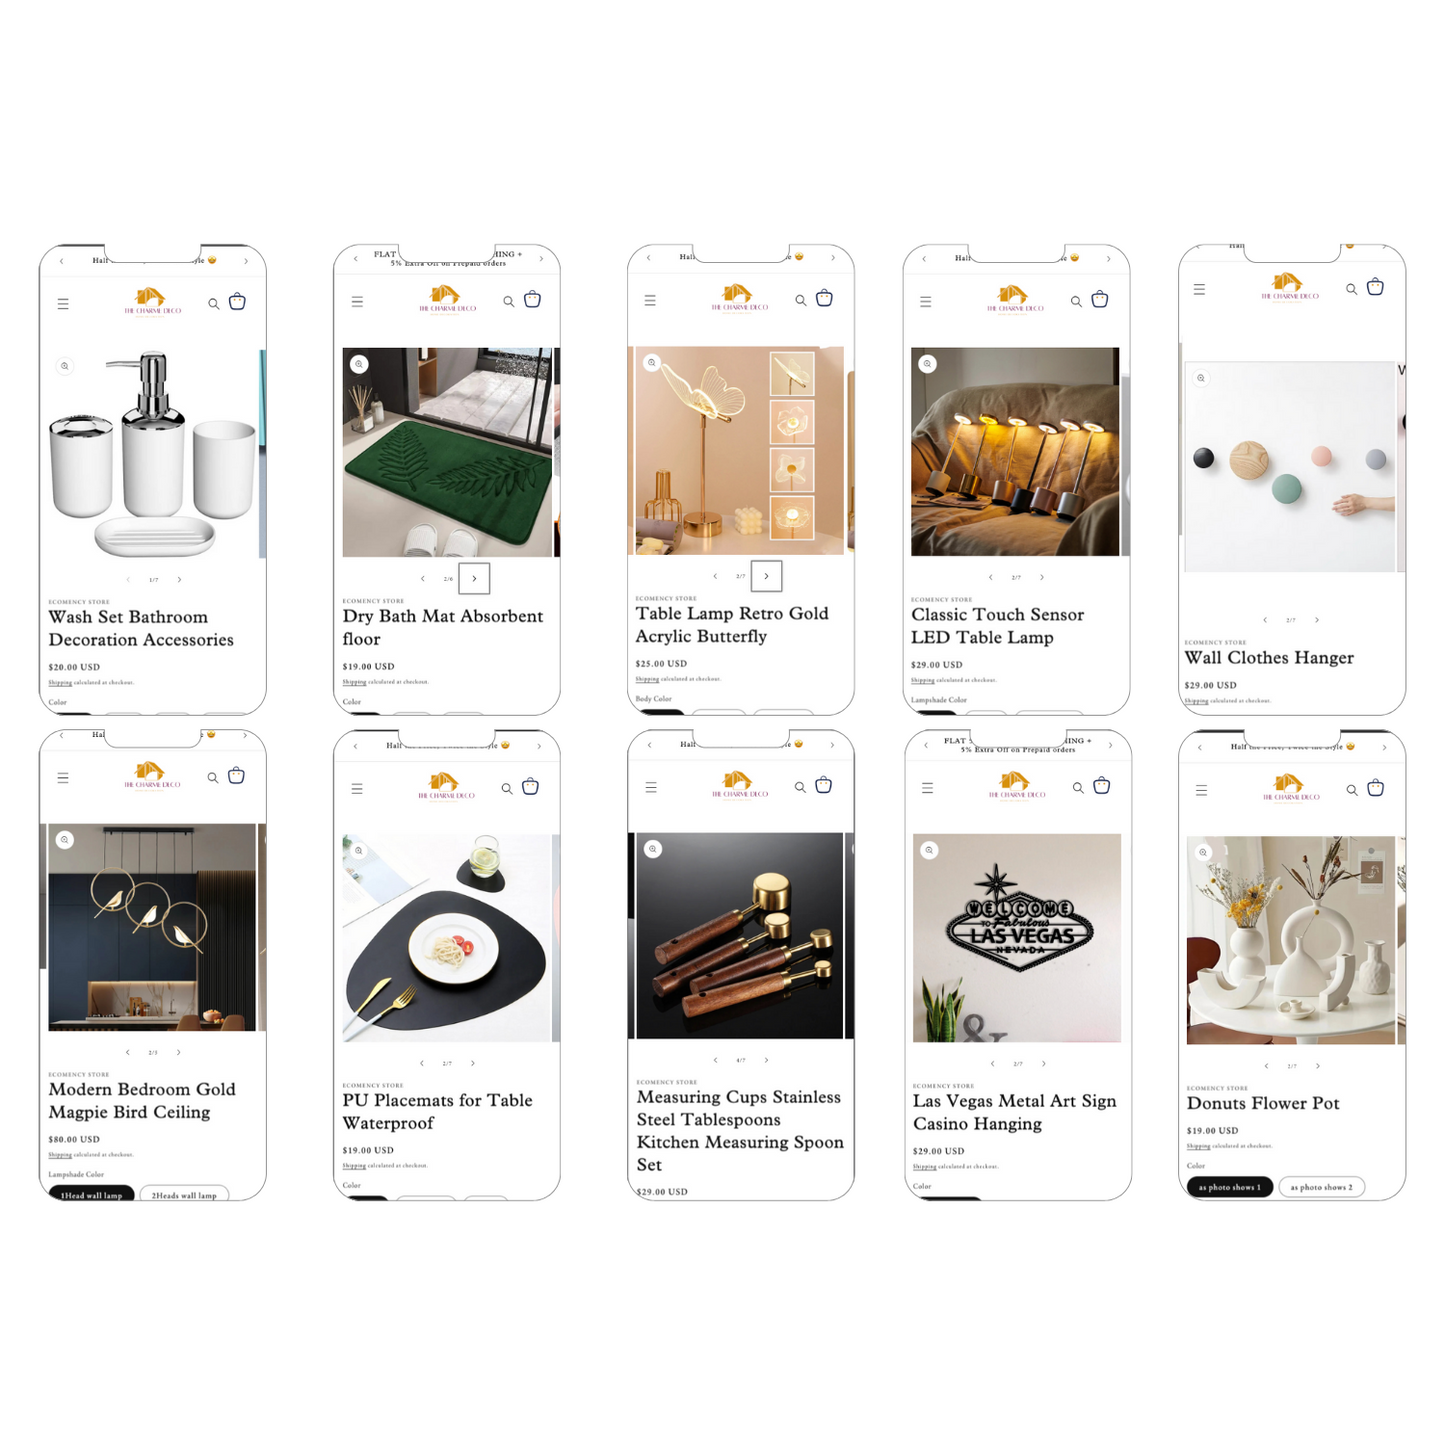 The Charm Decor: Ready-Made Home Decor Stores for Instant Elegance